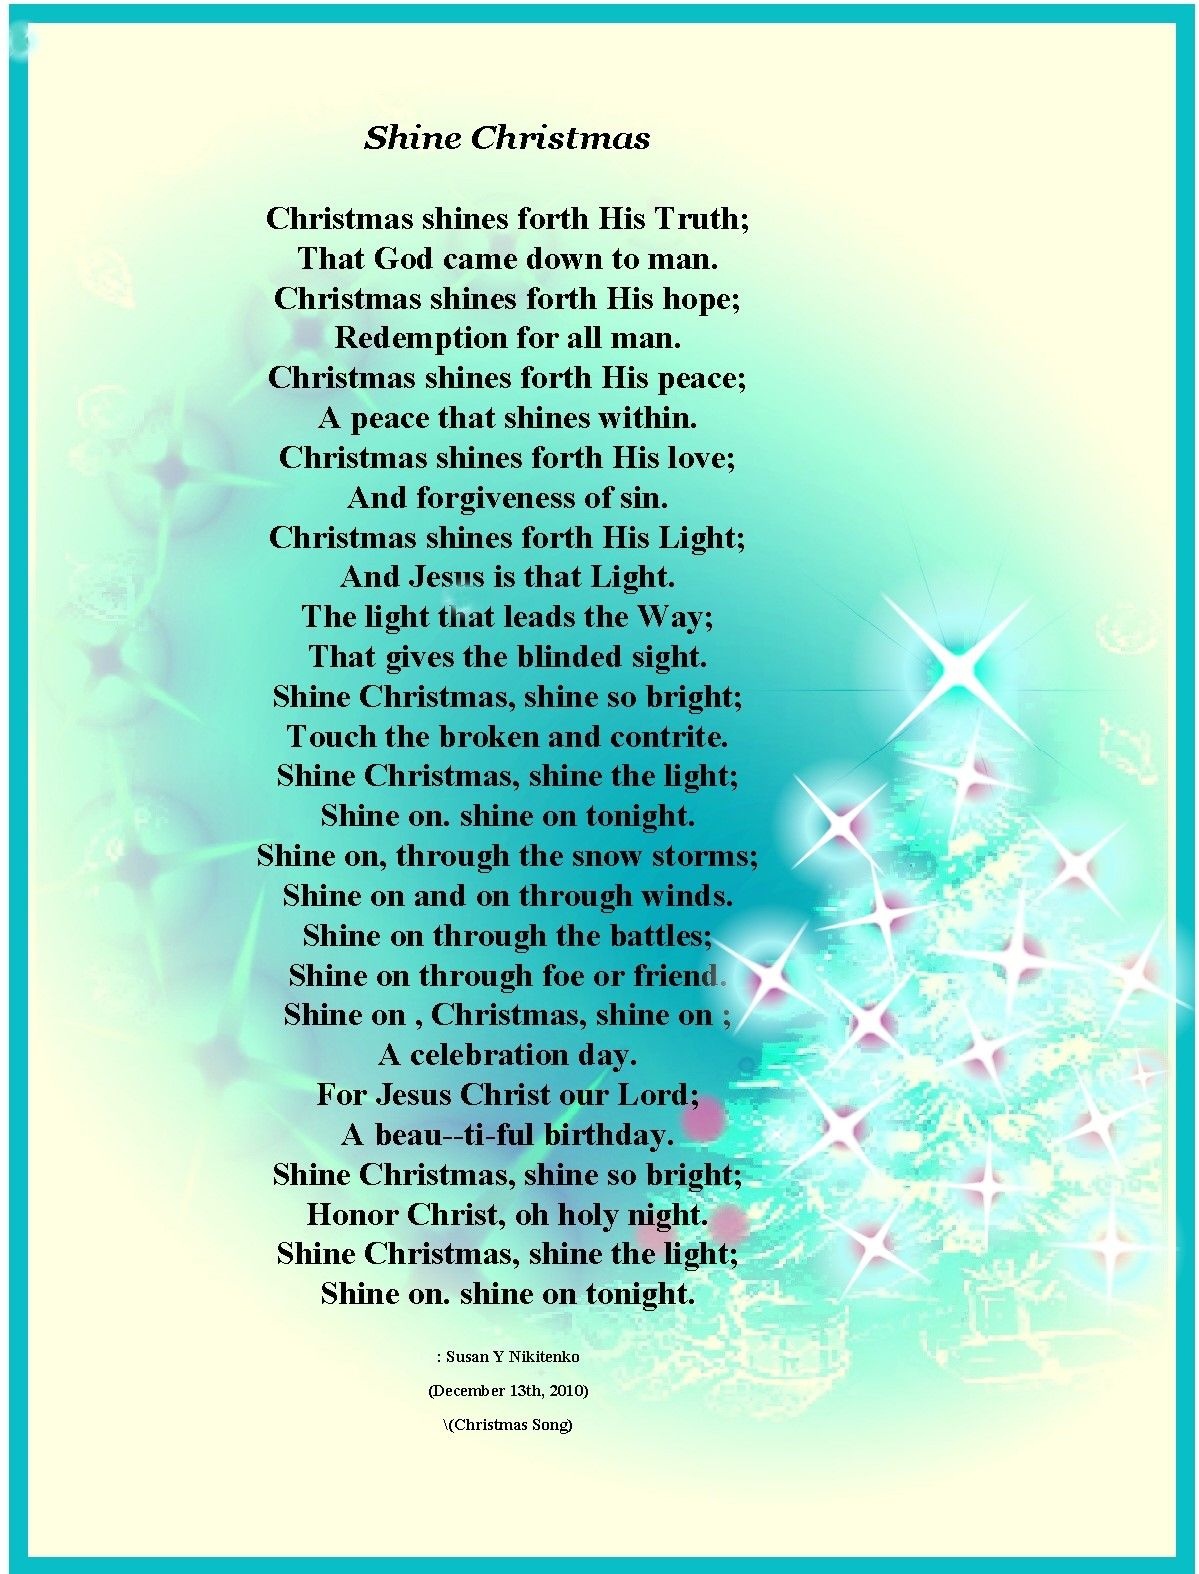 Christian Christmas Poems About Angels | Christian Images In My - Free Printable Christian Christmas Poems